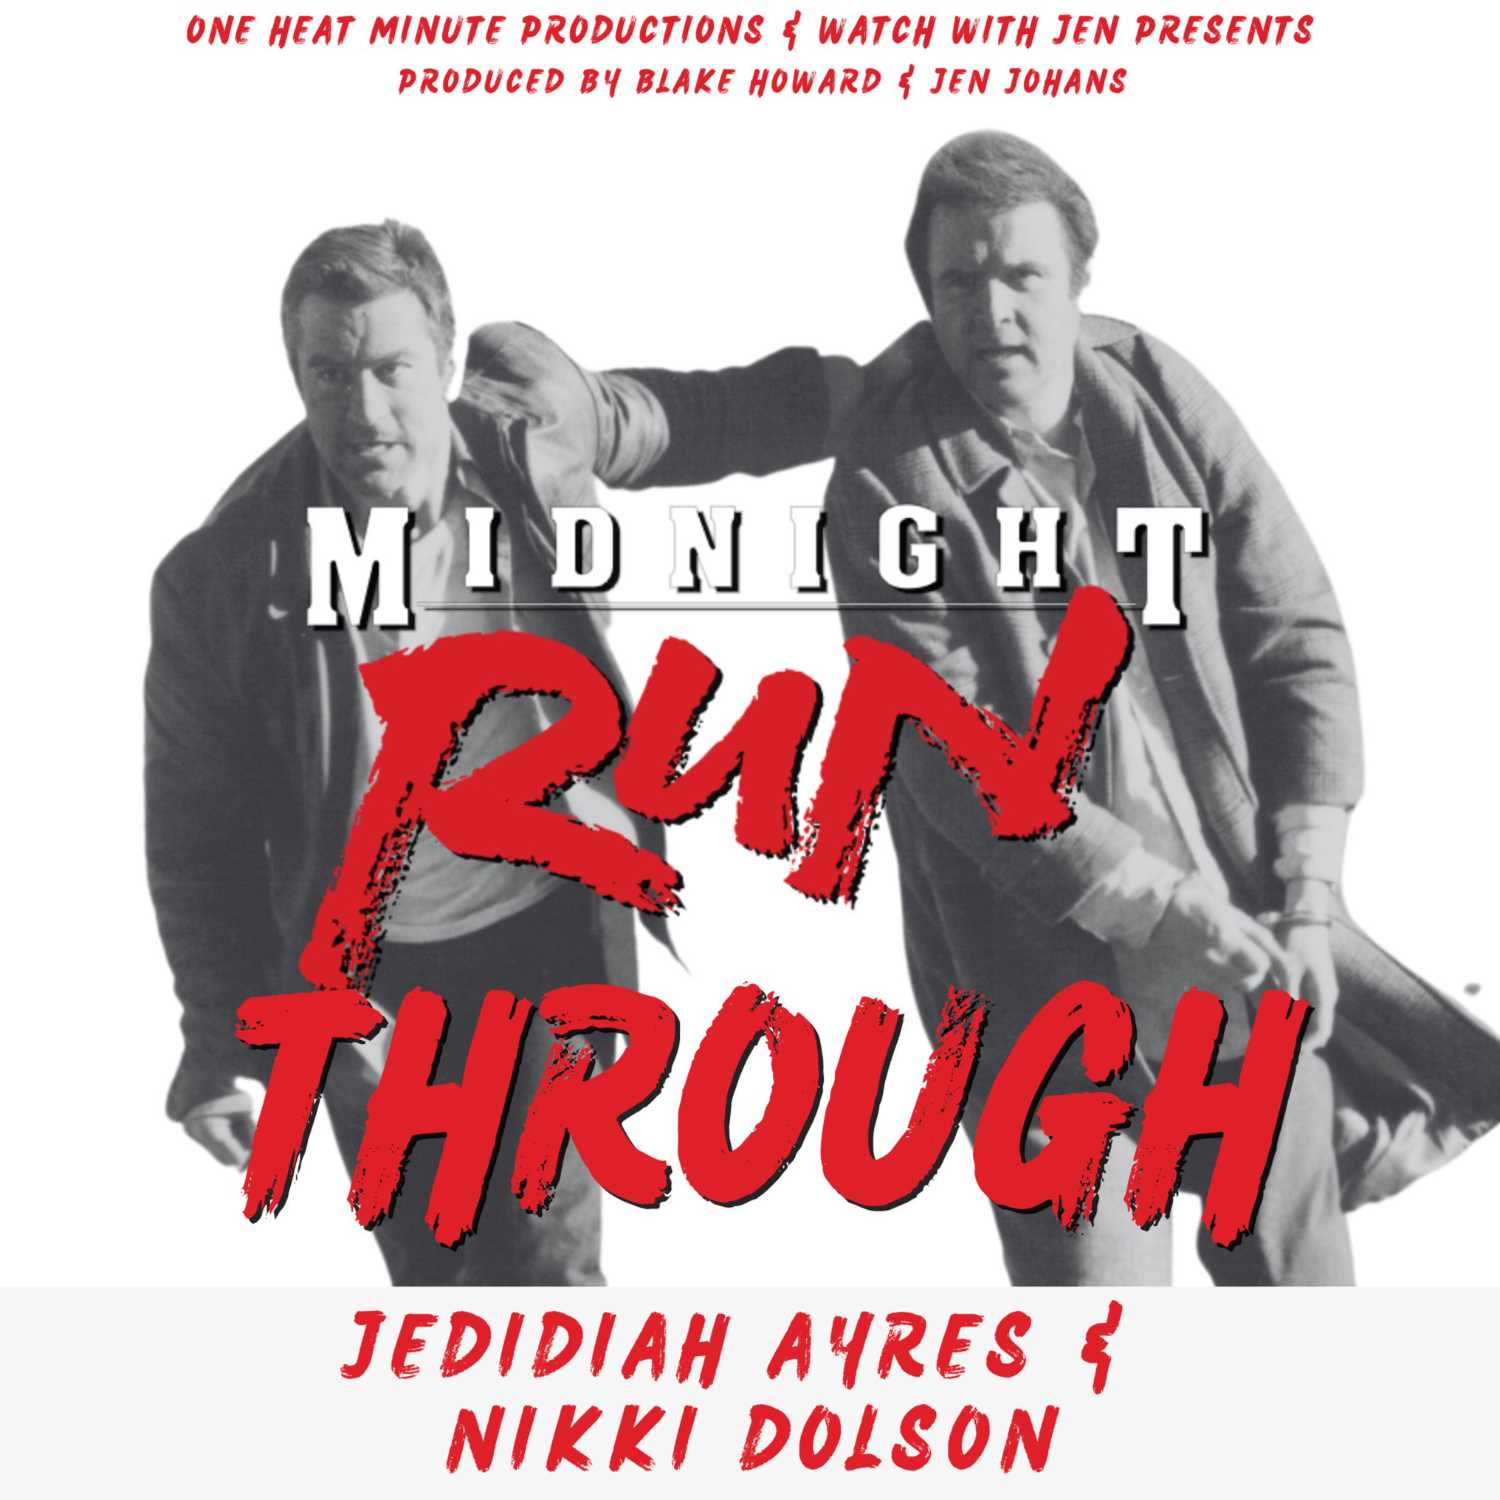 MIDNIGHT RUN-THROUGH - Episode 4 with Jedidiah Ayres & Nikki Dolson (From One Heat Minute Productions & Watch With Jen)